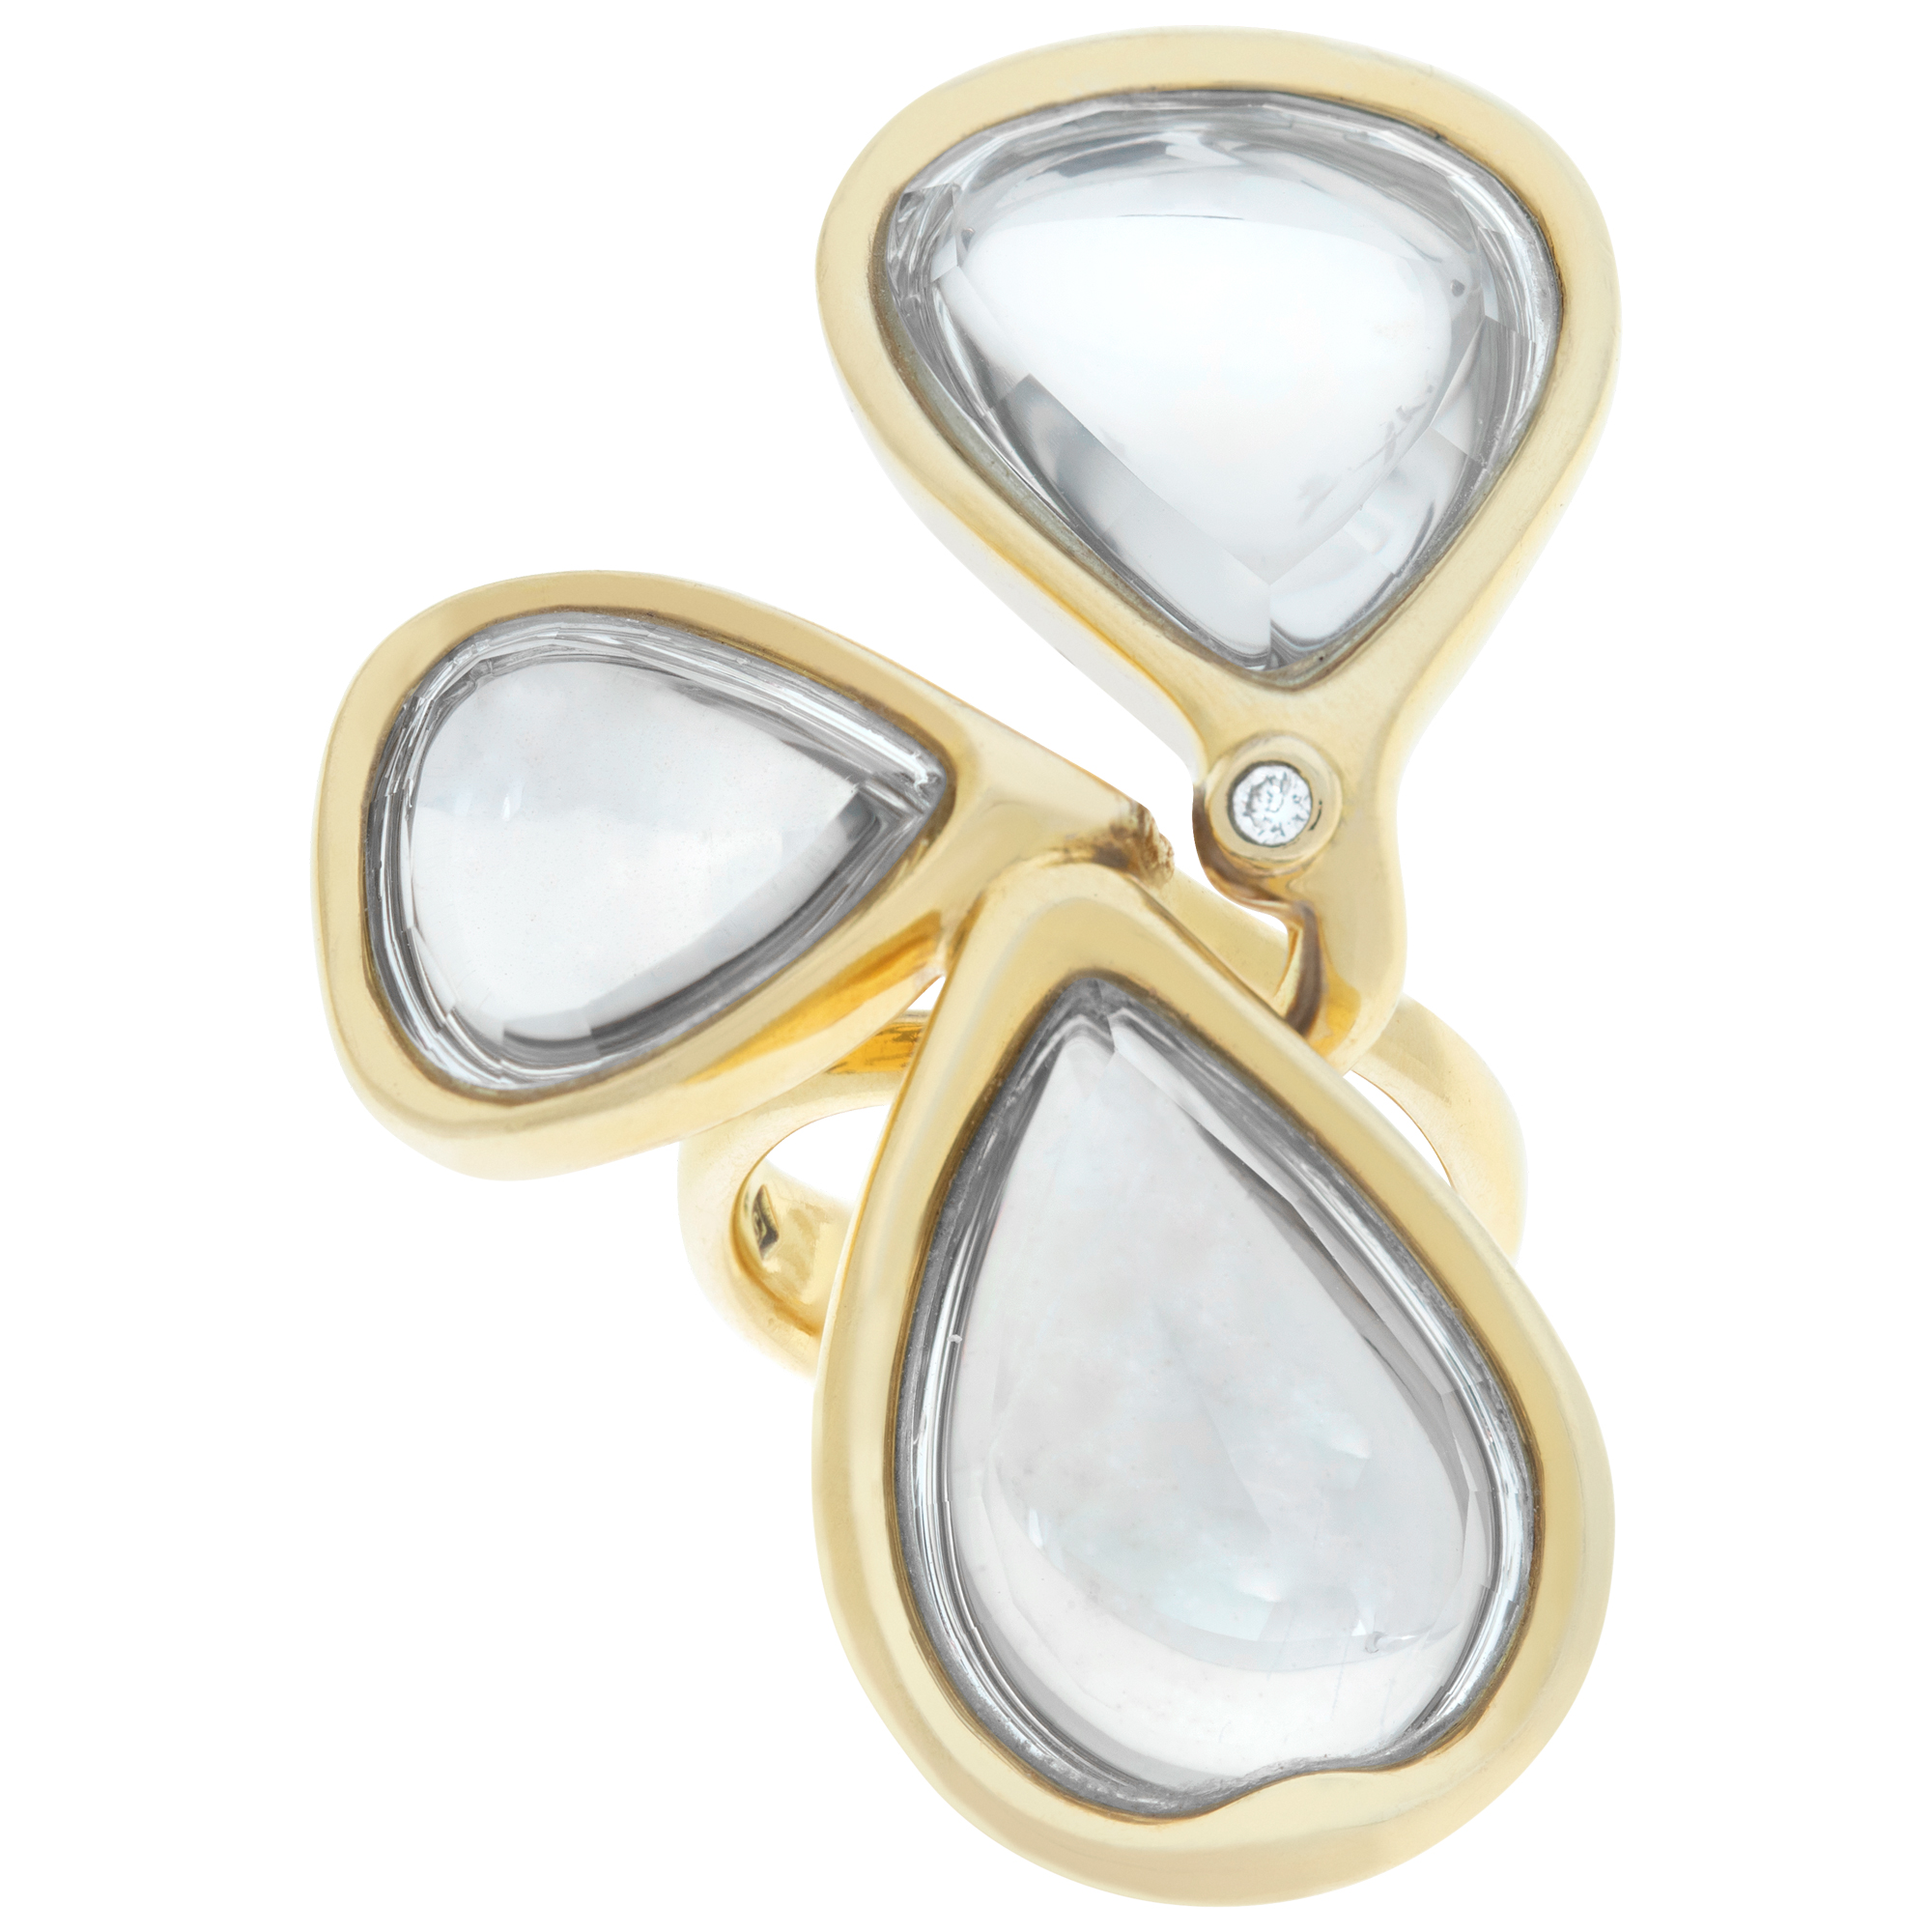 H Stern free form flower ring in 18k with reflective crystal petals and single bezel set diamond in the center. image 1